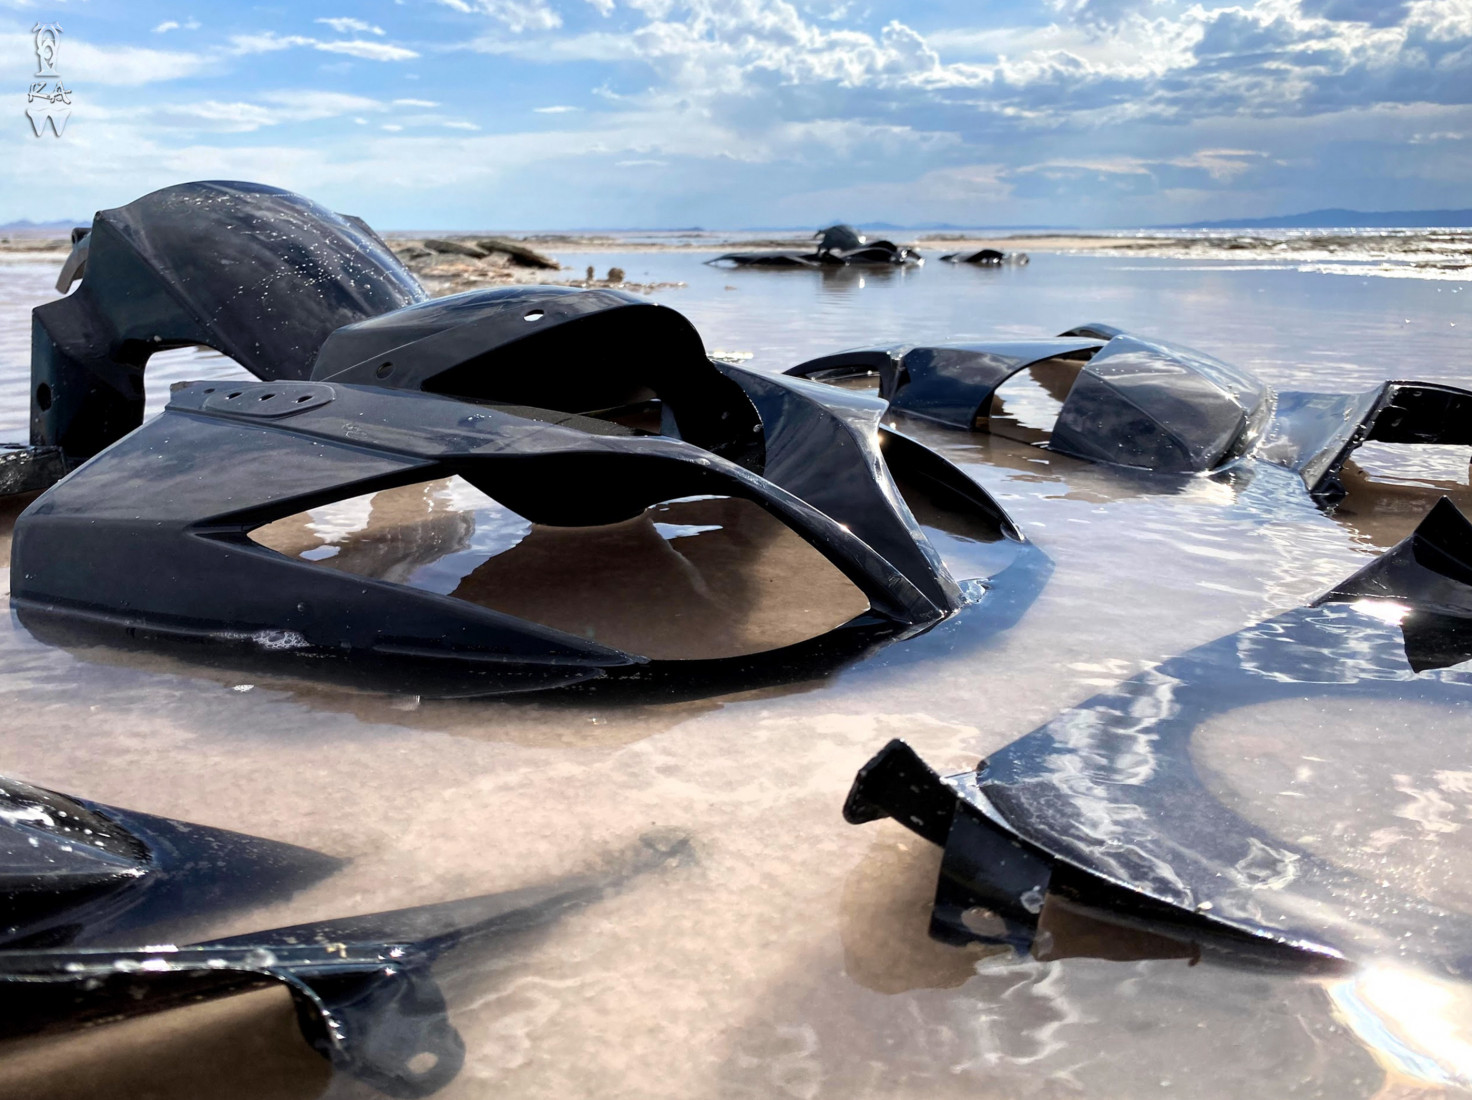 Pieces of black plastic partially submerged on the beach